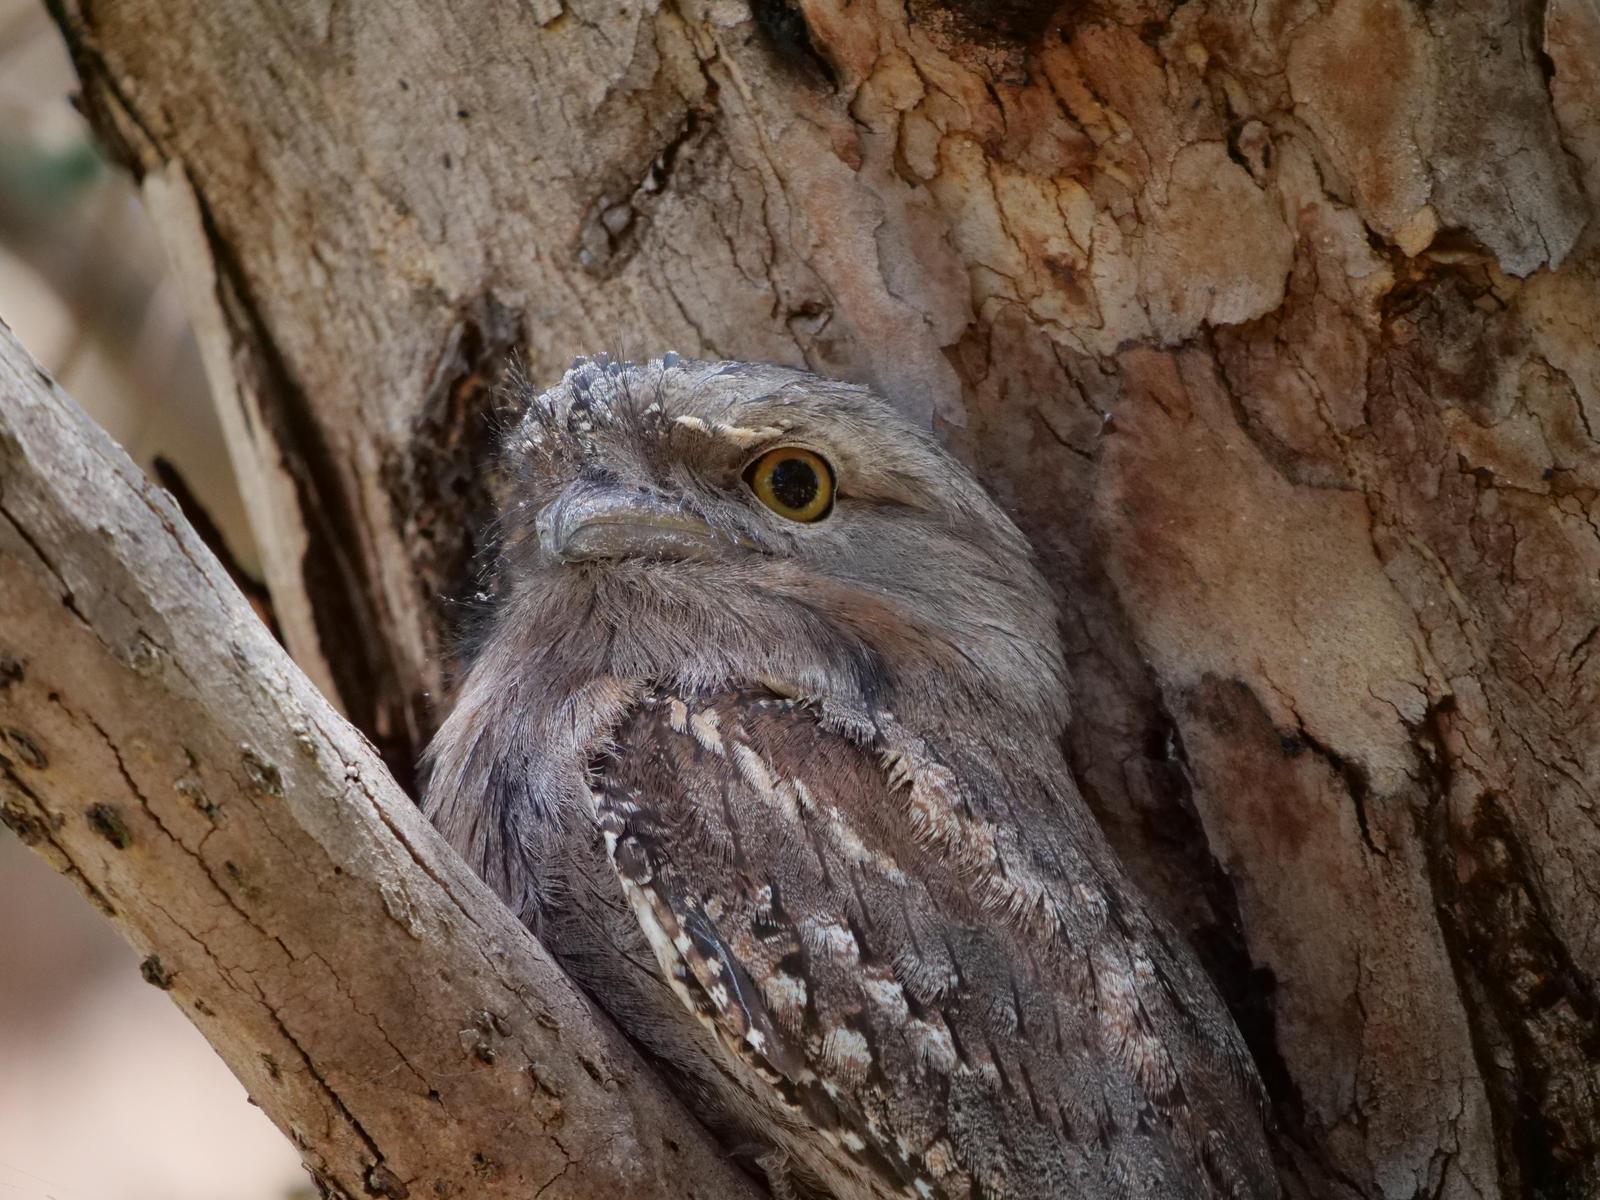 Tawny Frogmouth Photo by Peter Lowe